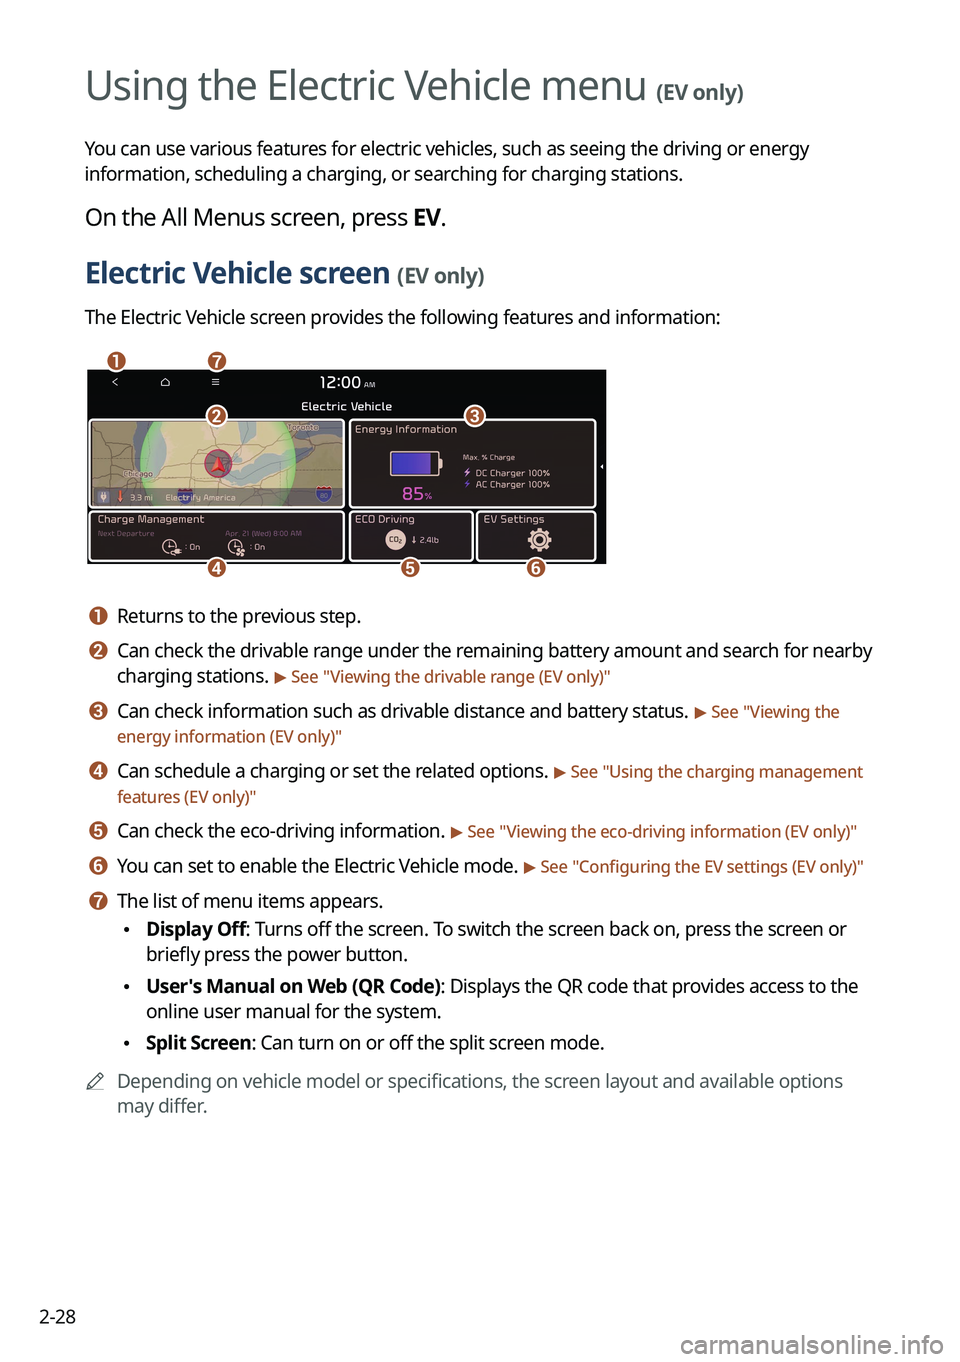 KIA NIRO EV 2022  Navigation System Quick Reference Guide 2-28
Using the Electric Vehicle menu (EV only)
You can use various features for electric vehicles, such as seeing the driving or energy 
information, scheduling a charging, or searching for charging s